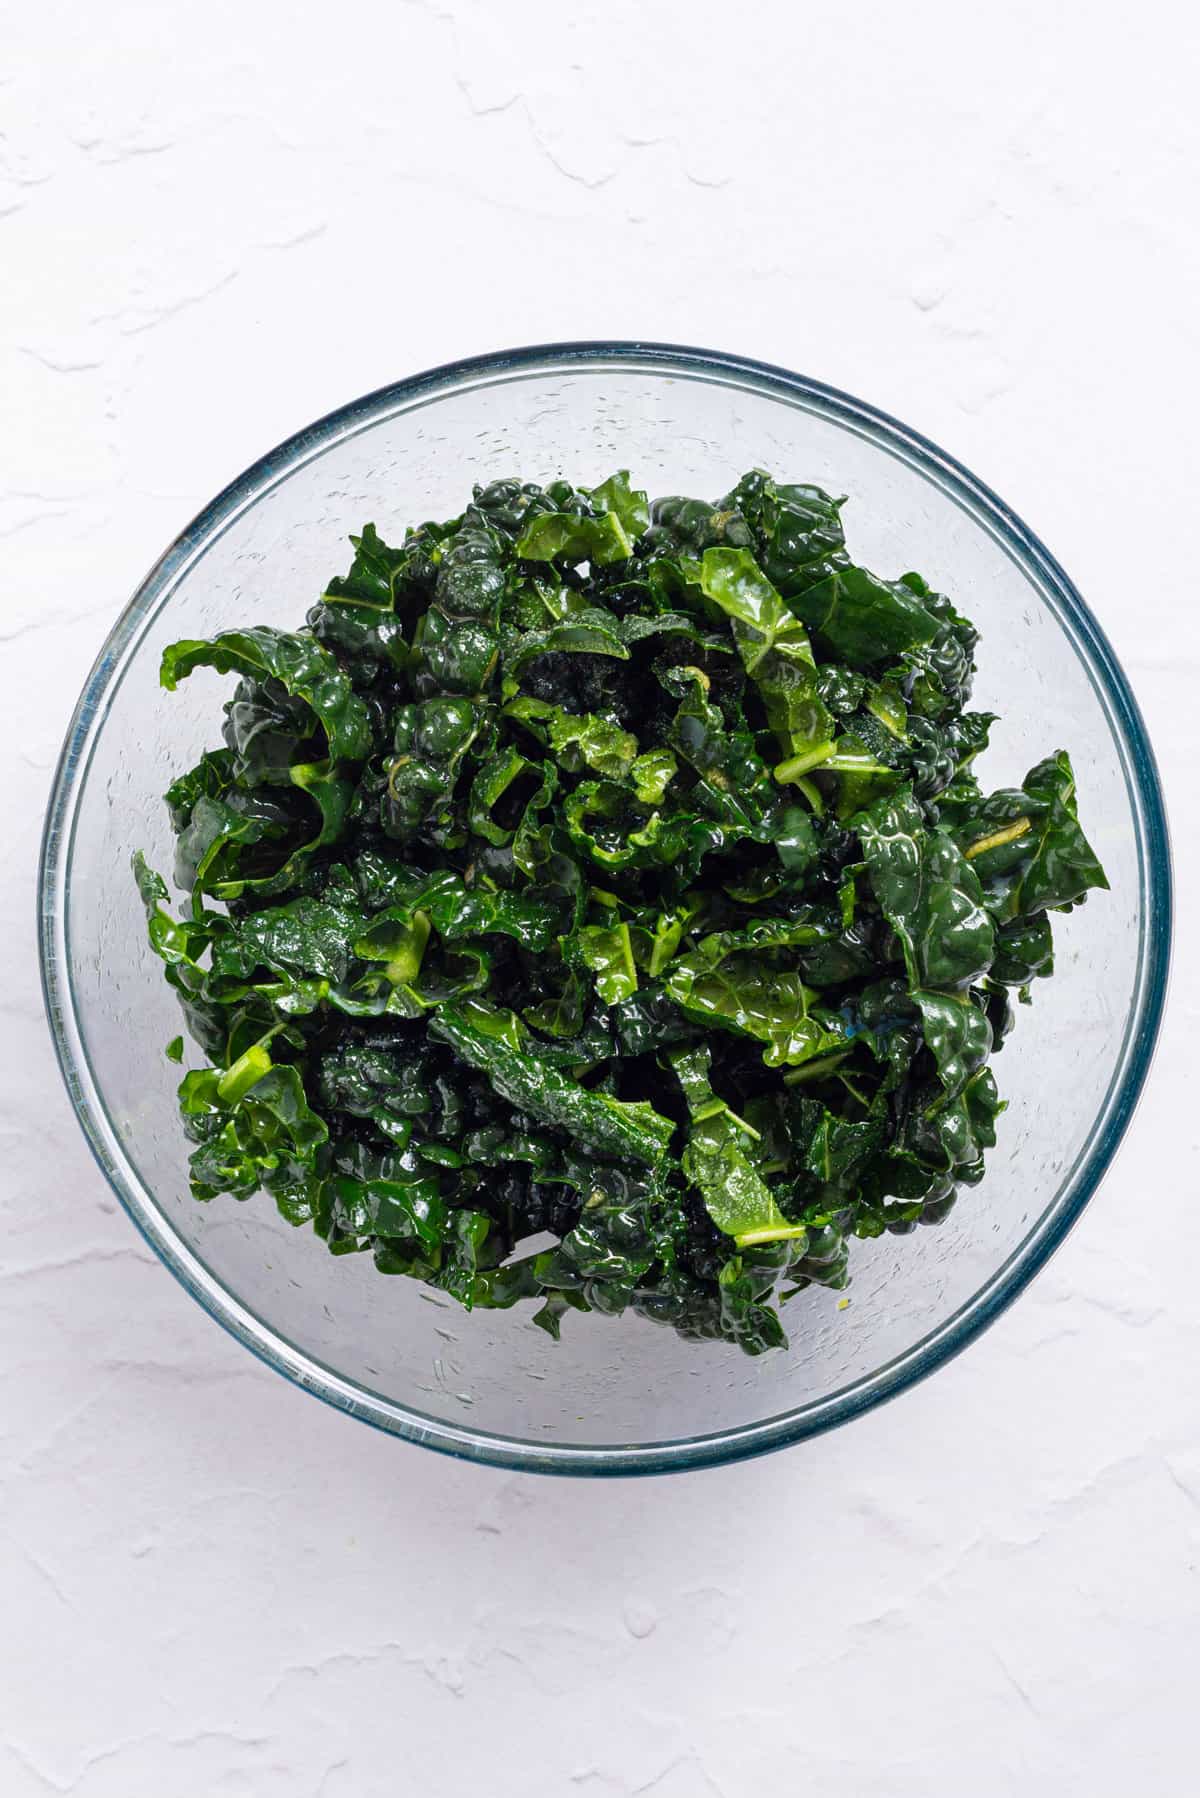 An image of kale leaves with salad dressing tossed in a bowl